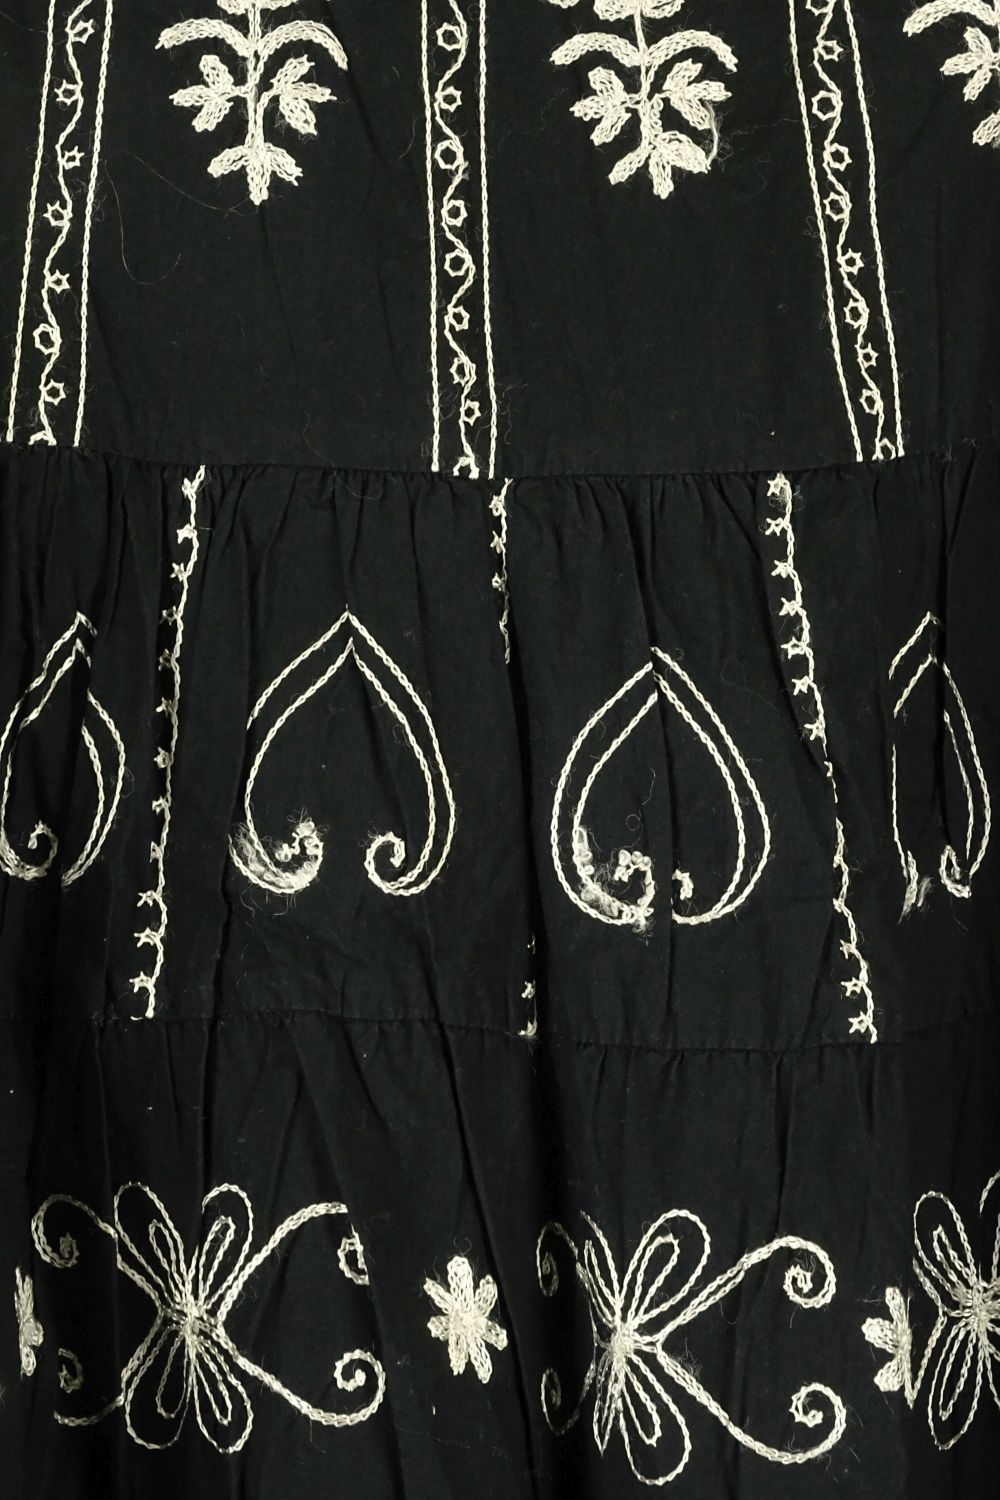 B. Young Xl Skirt Black And White